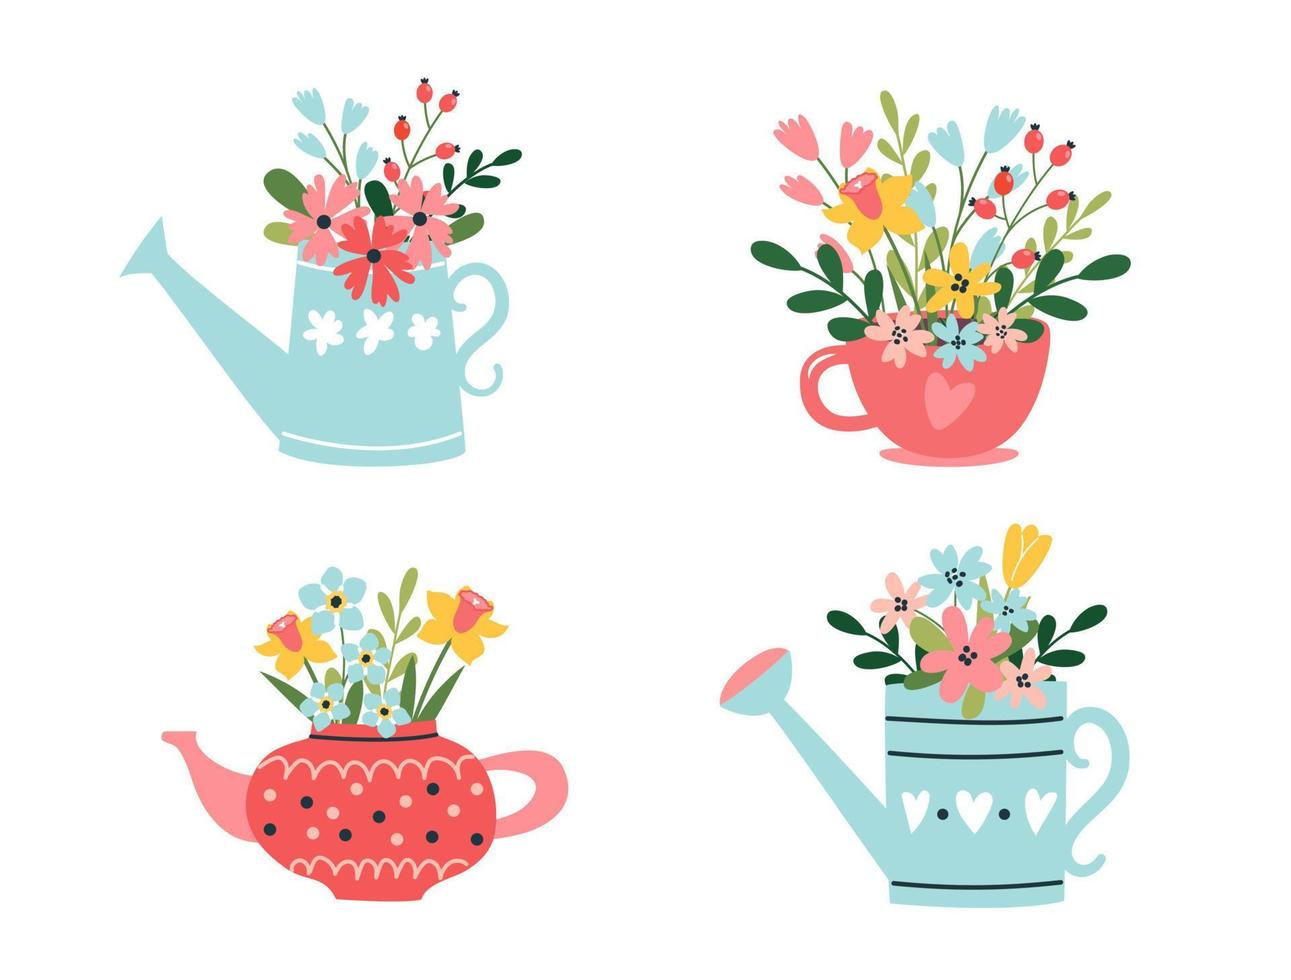 Spring set of hand drawn elements. Floral decorations. Bouquets of flowers in a watering can, cup, teapot. Seasonal symbols. Suitable for scrapbooking, greeting card, poster, tag, flower shop. vector